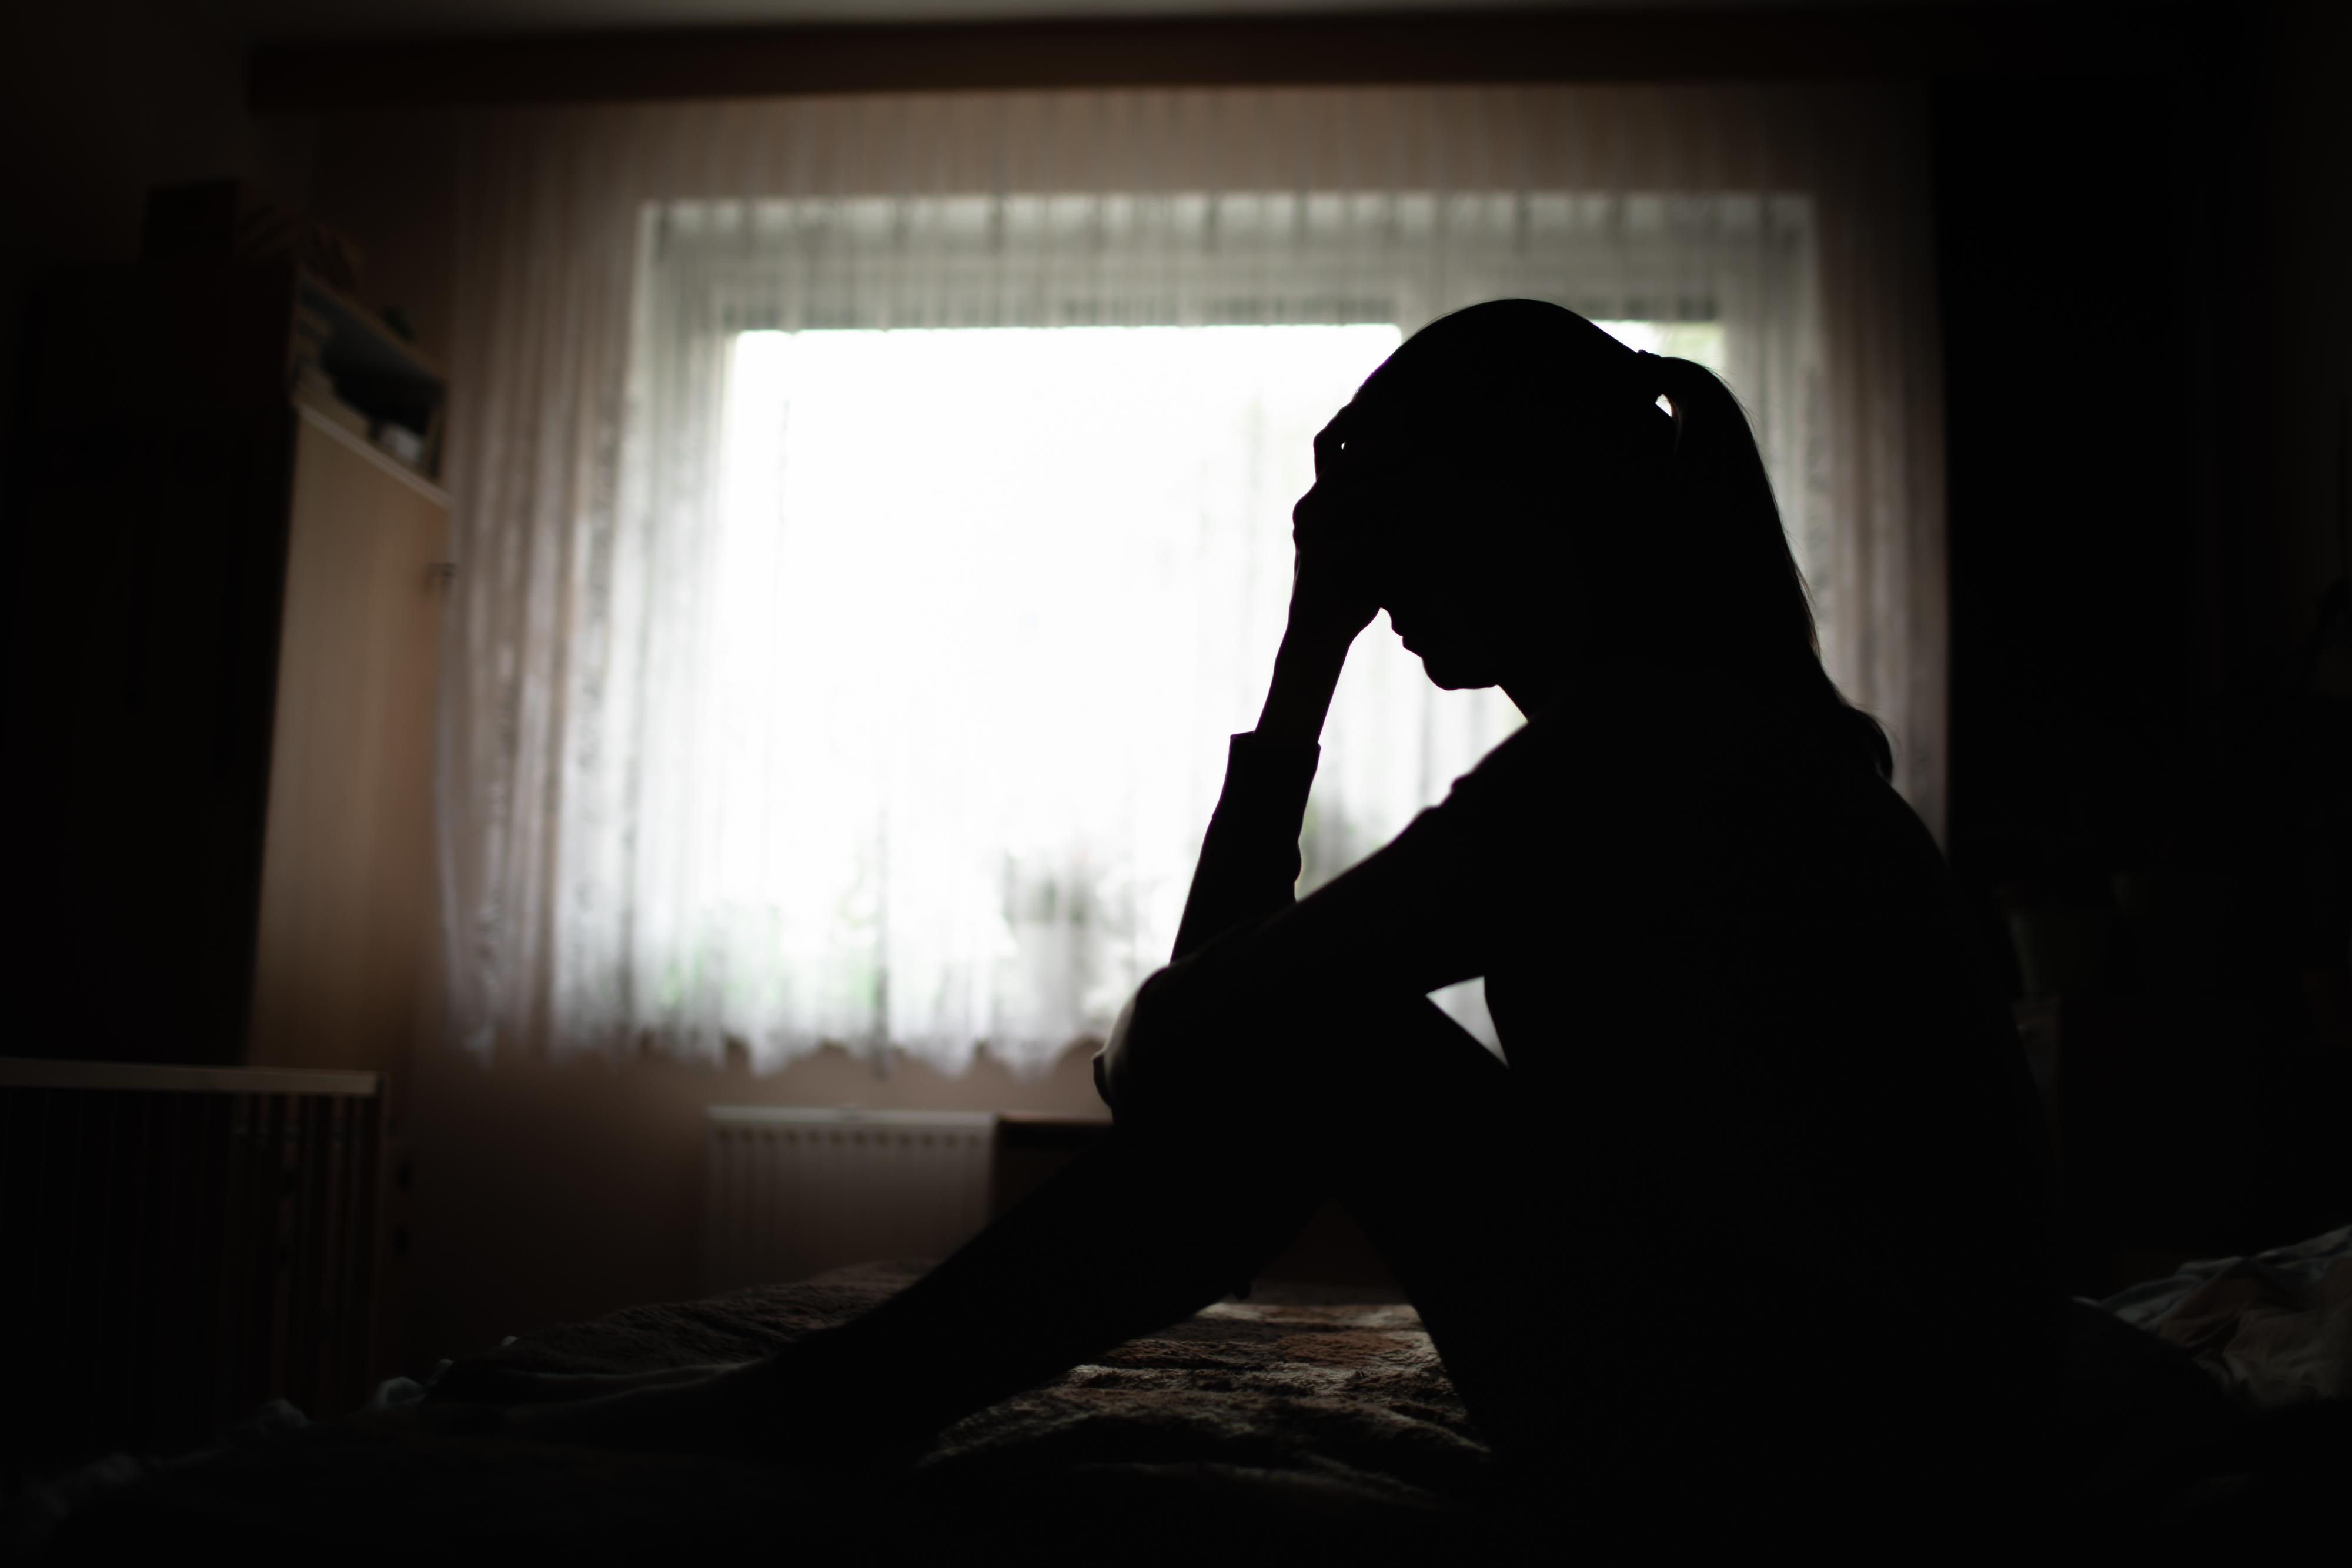 Silhouette of a person sitting on a bed with their head in hand in front of a window with sheer curtains